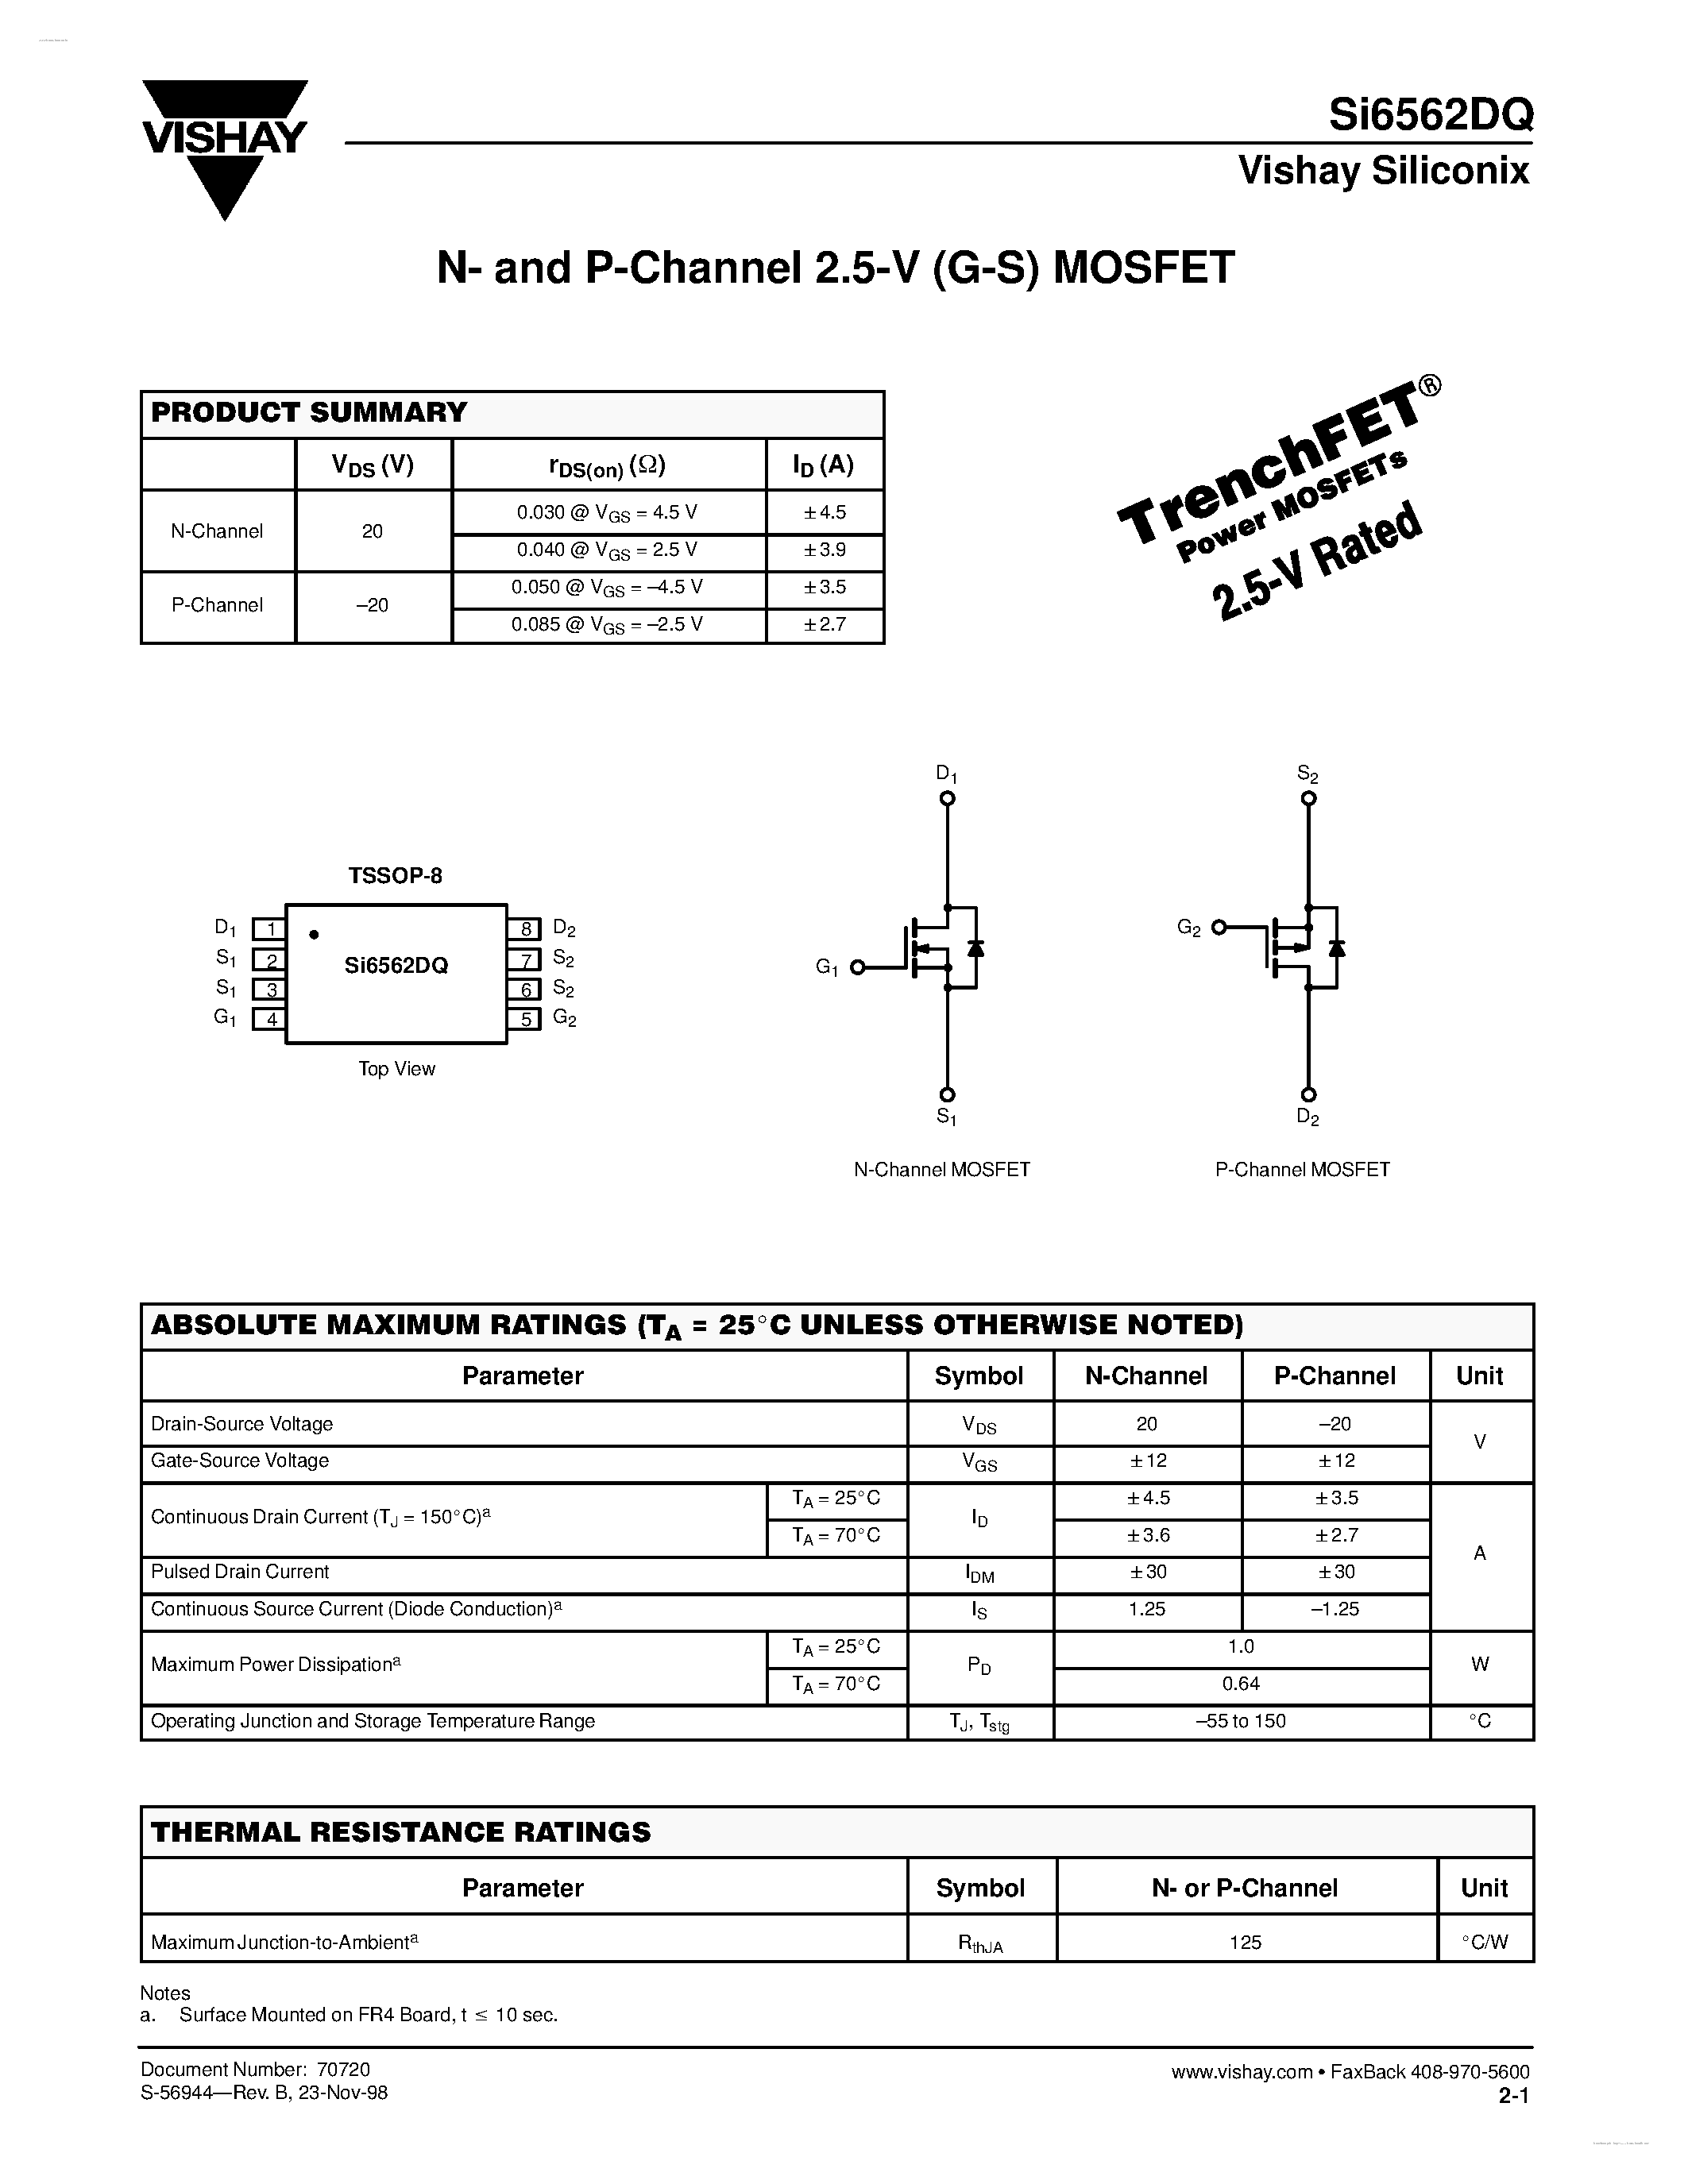 Даташит SI6562DQ - N- and P-Channel 2.5-V (G-S) MOSFET страница 1